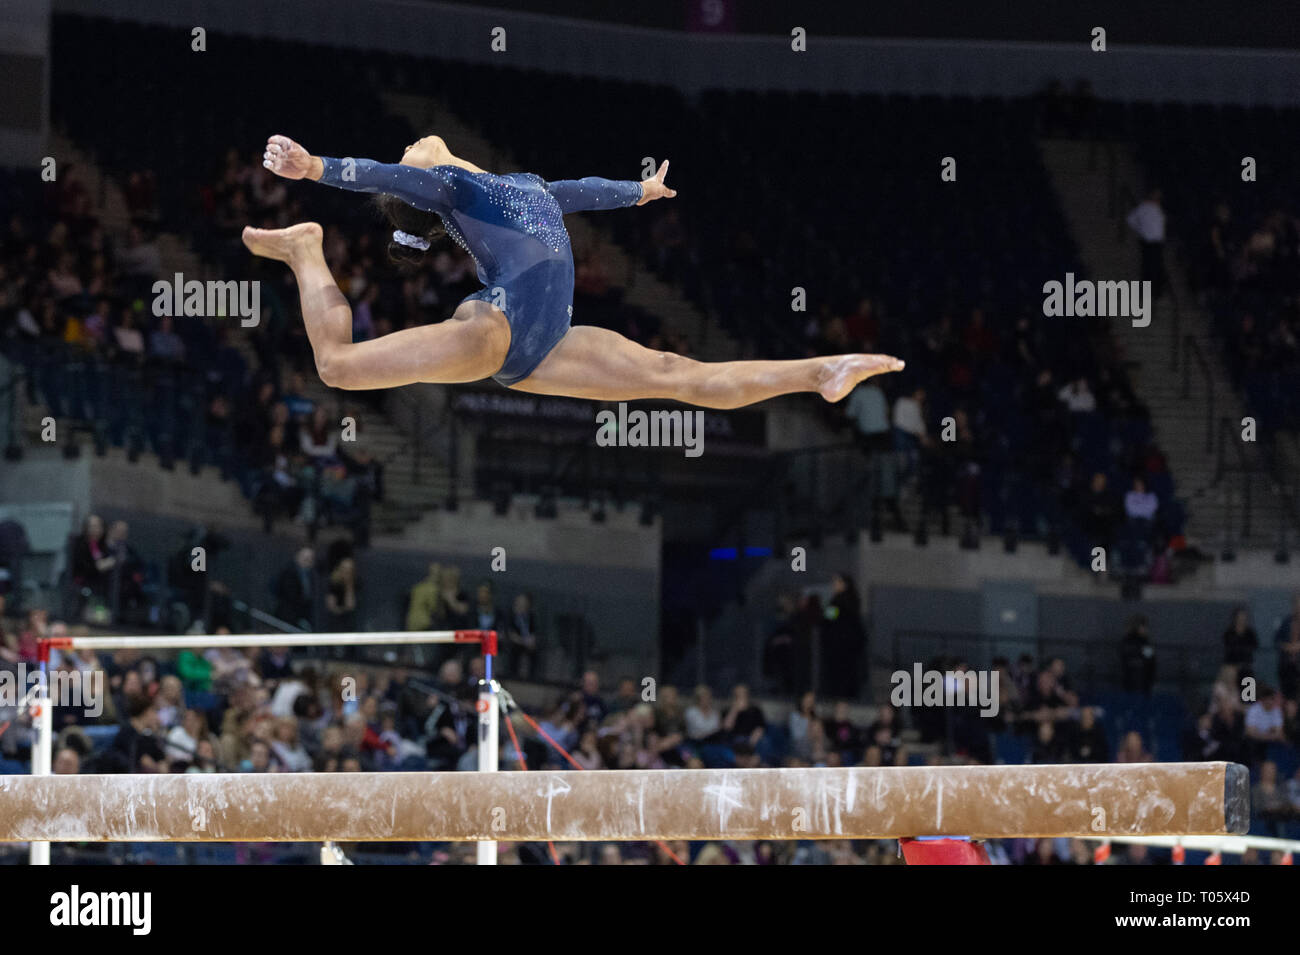 Liverpool, UK. 17th March 2019. Alia Leat of Heathrow Gym competing at the Men’s and Women’s Artistic British Championships 2019, M&S Bank Arena, Liverpool, UK. Credit: Iain Scott Photography/Alamy Live News Stock Photo